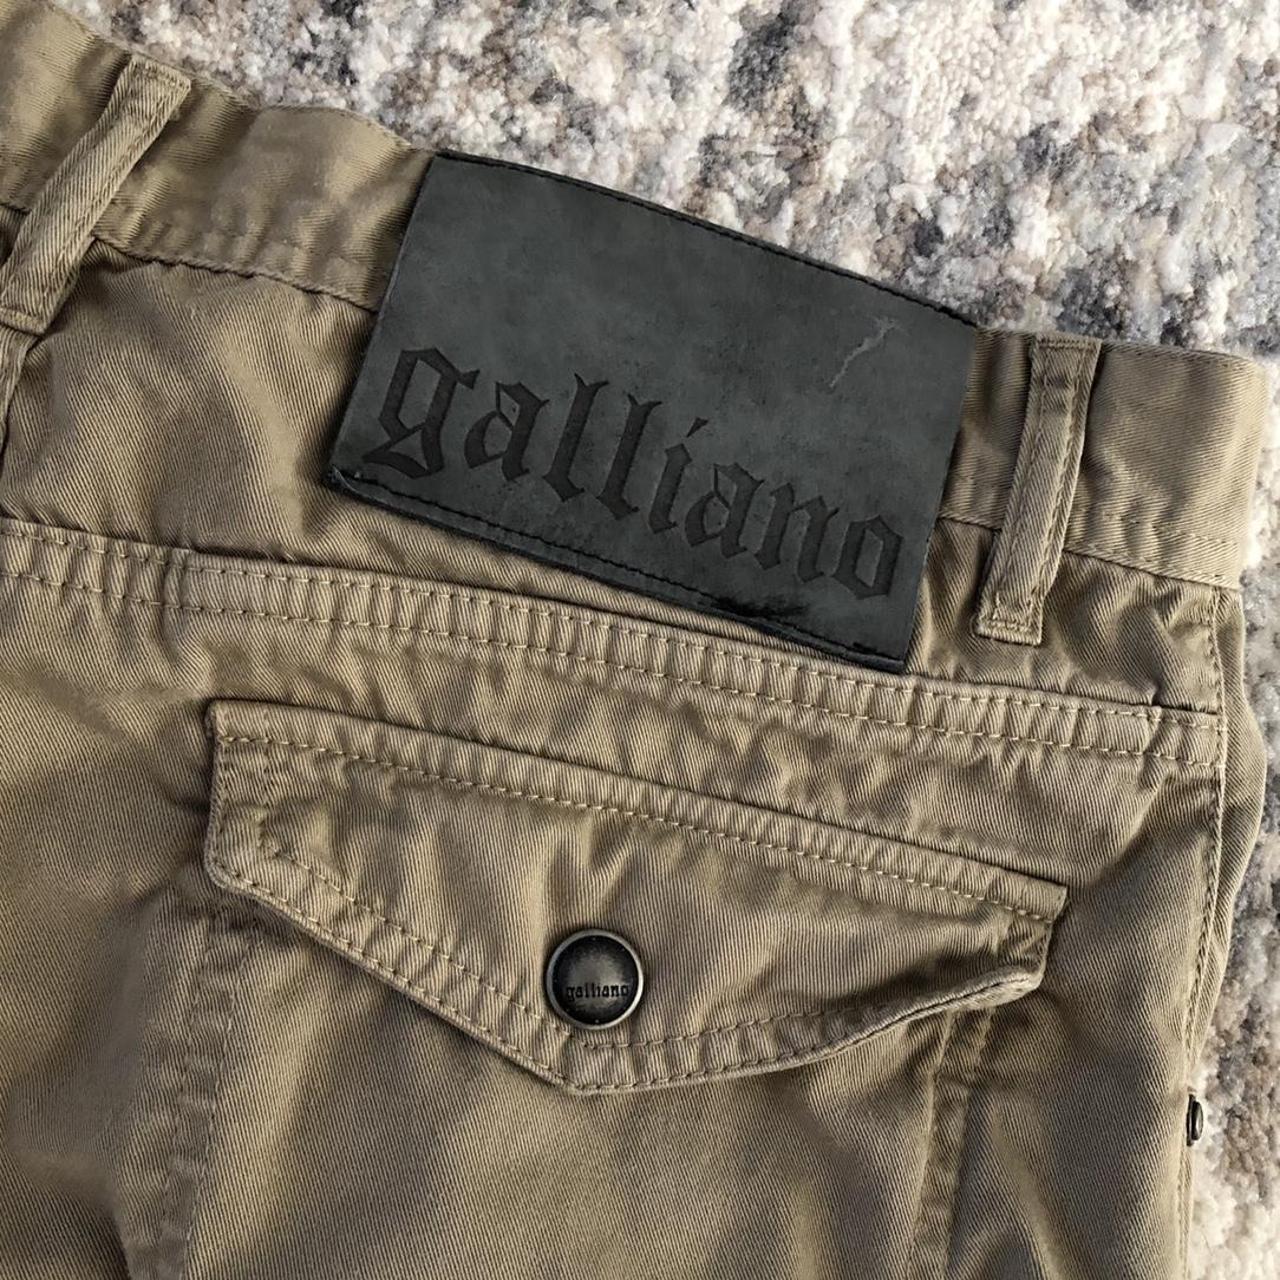 Galliano Men's Tan and Black Trousers